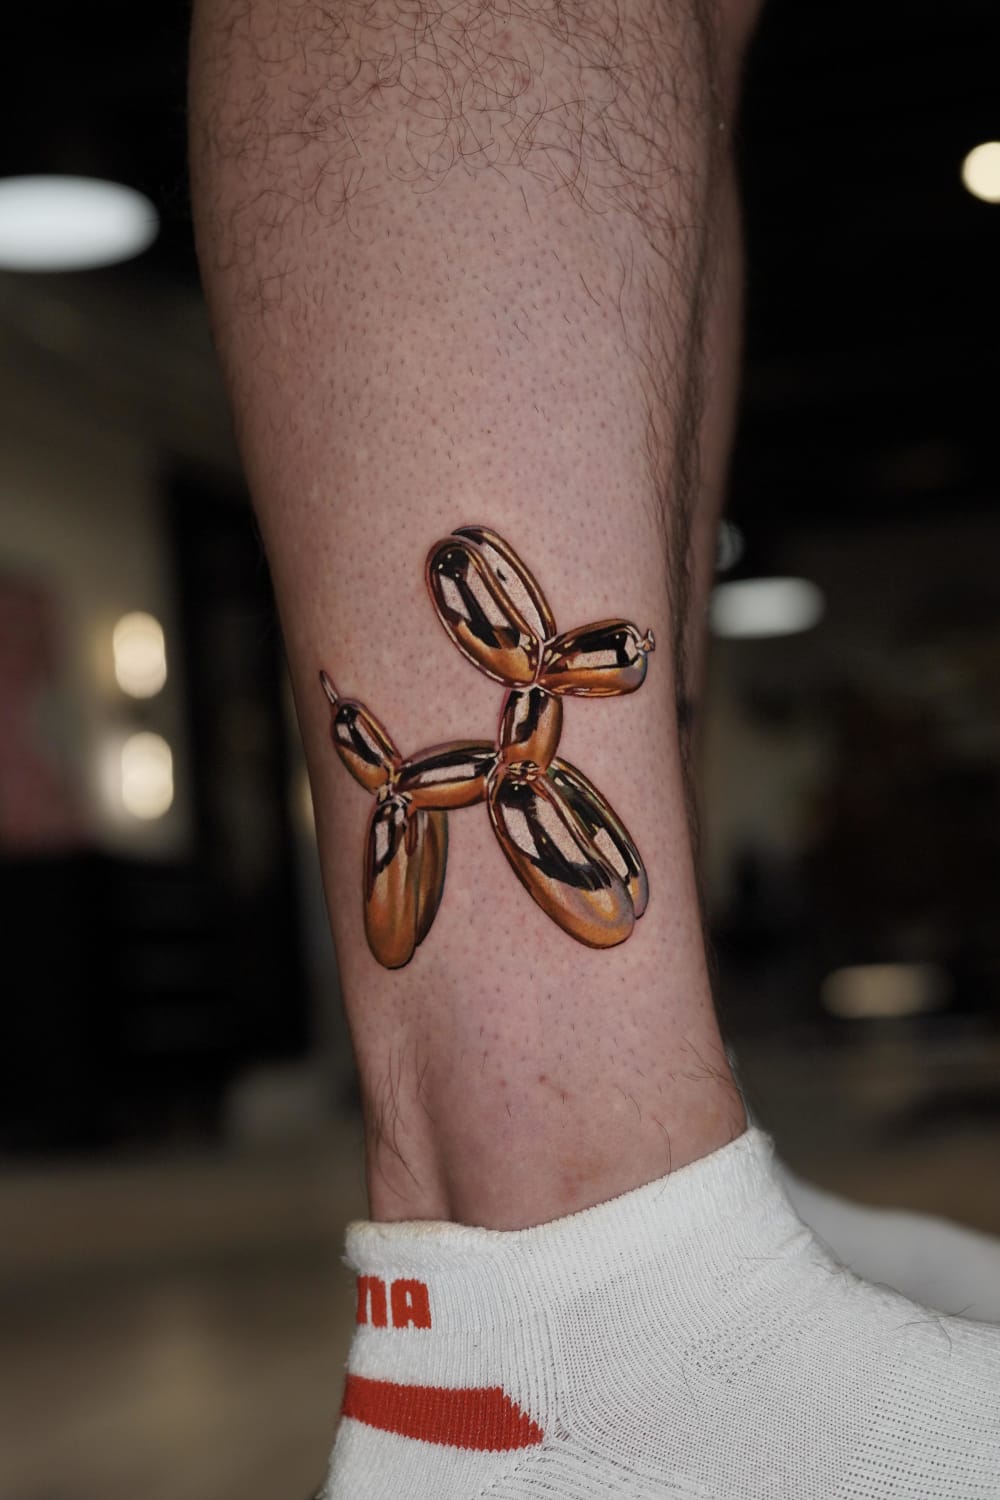 Golden Balloon Dog made by me, Pony Lawson at my shop Mayday! Tattoo Co in Chicago.